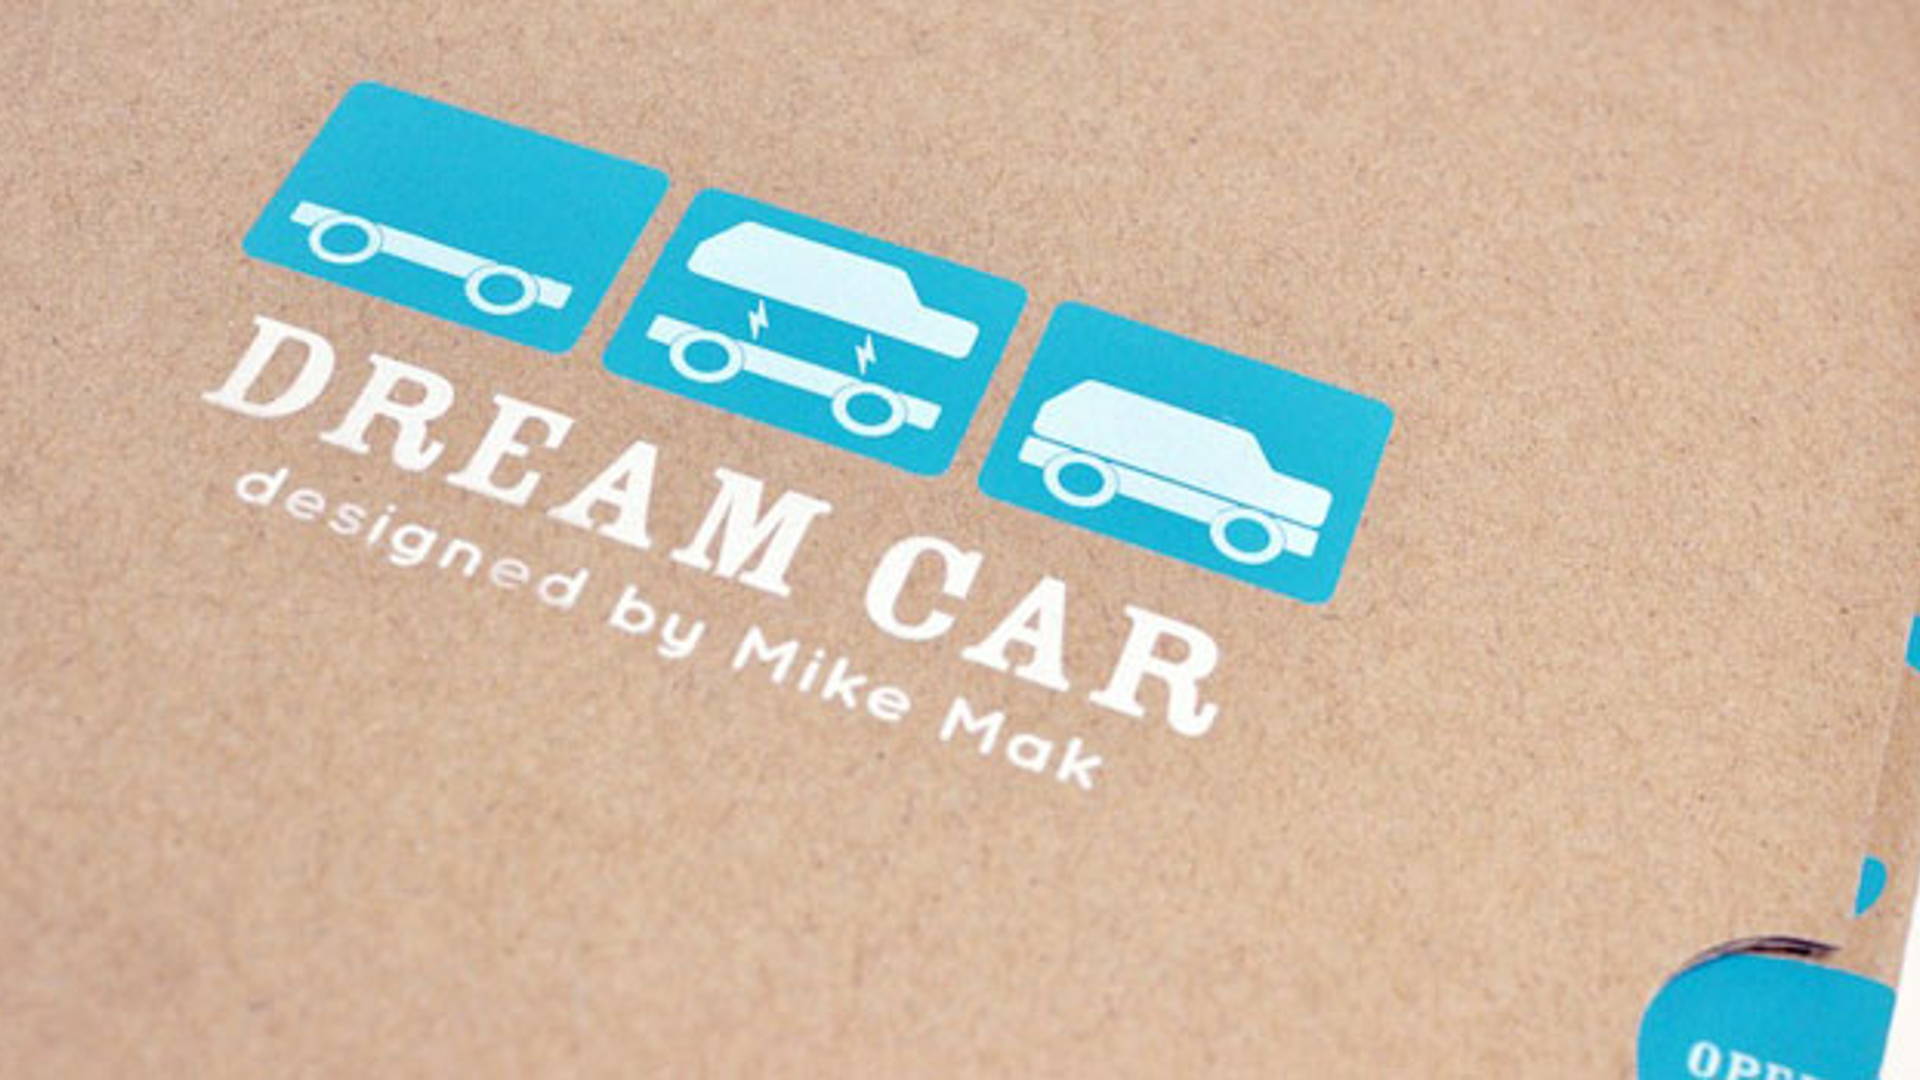 Featured image for Huzi "Dream Car" 